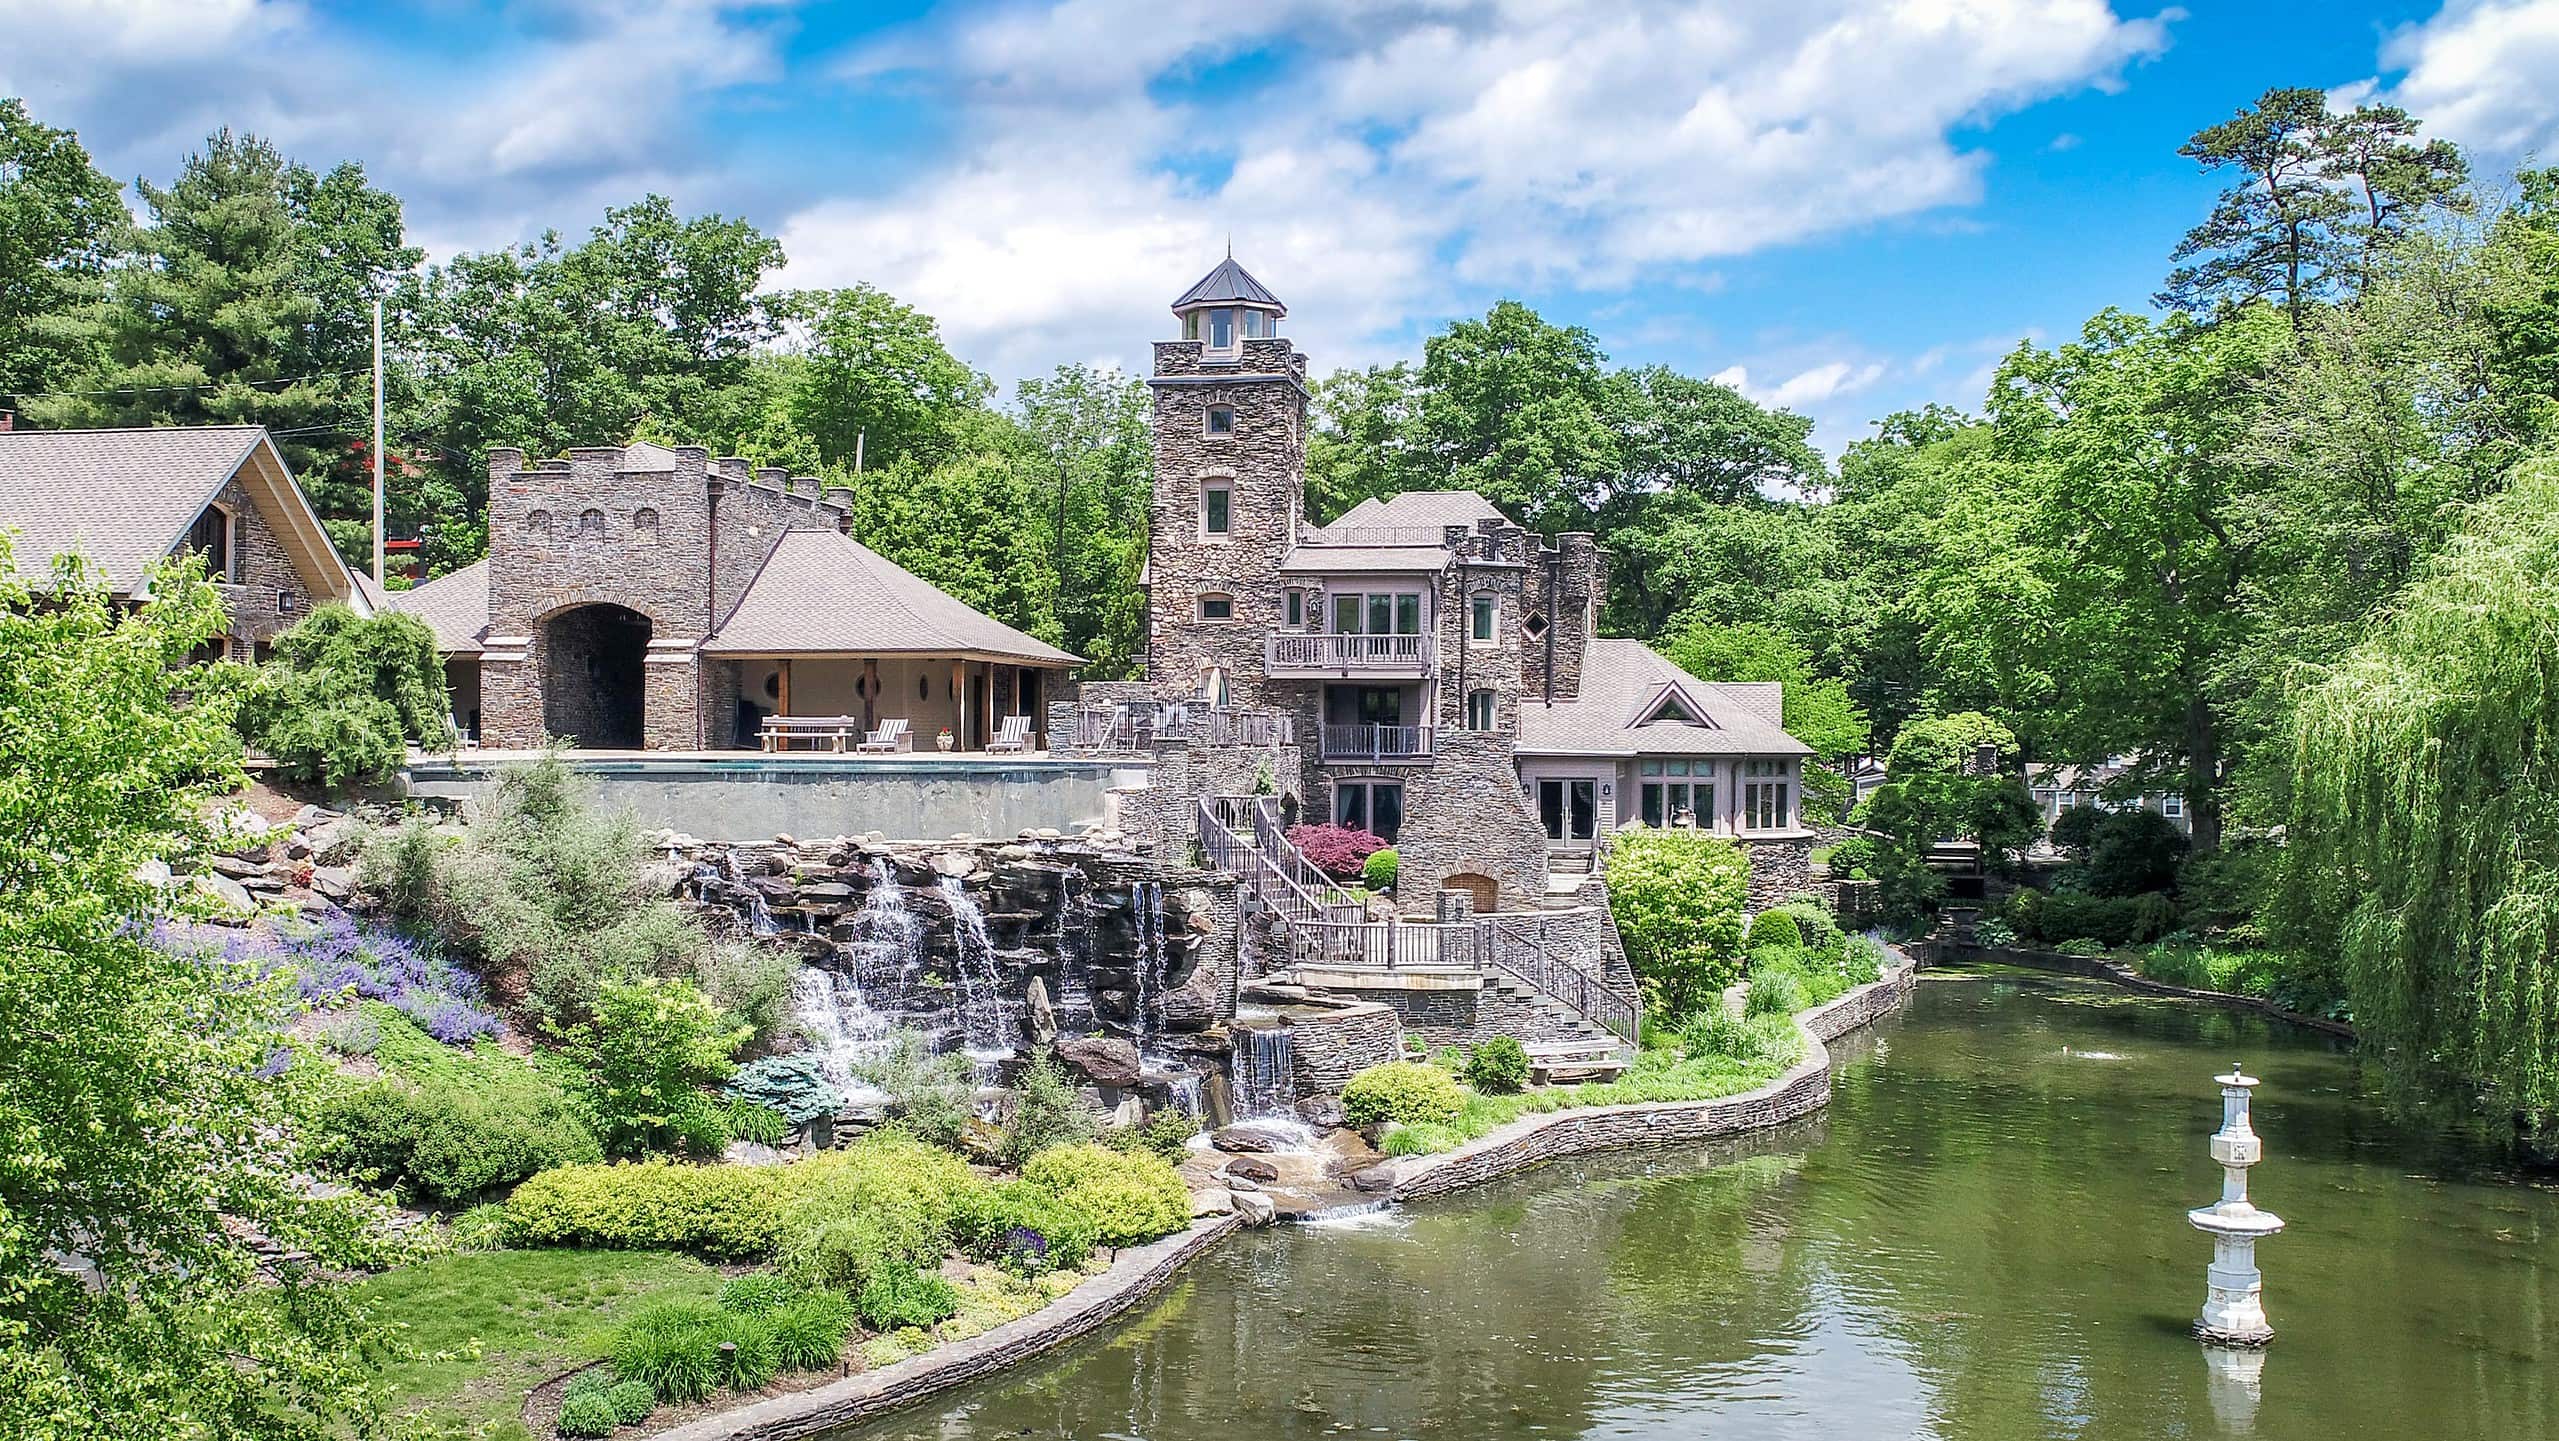 Derek Jeter Sells His Iconic Upstate New York Castle After Years of Price Cuts